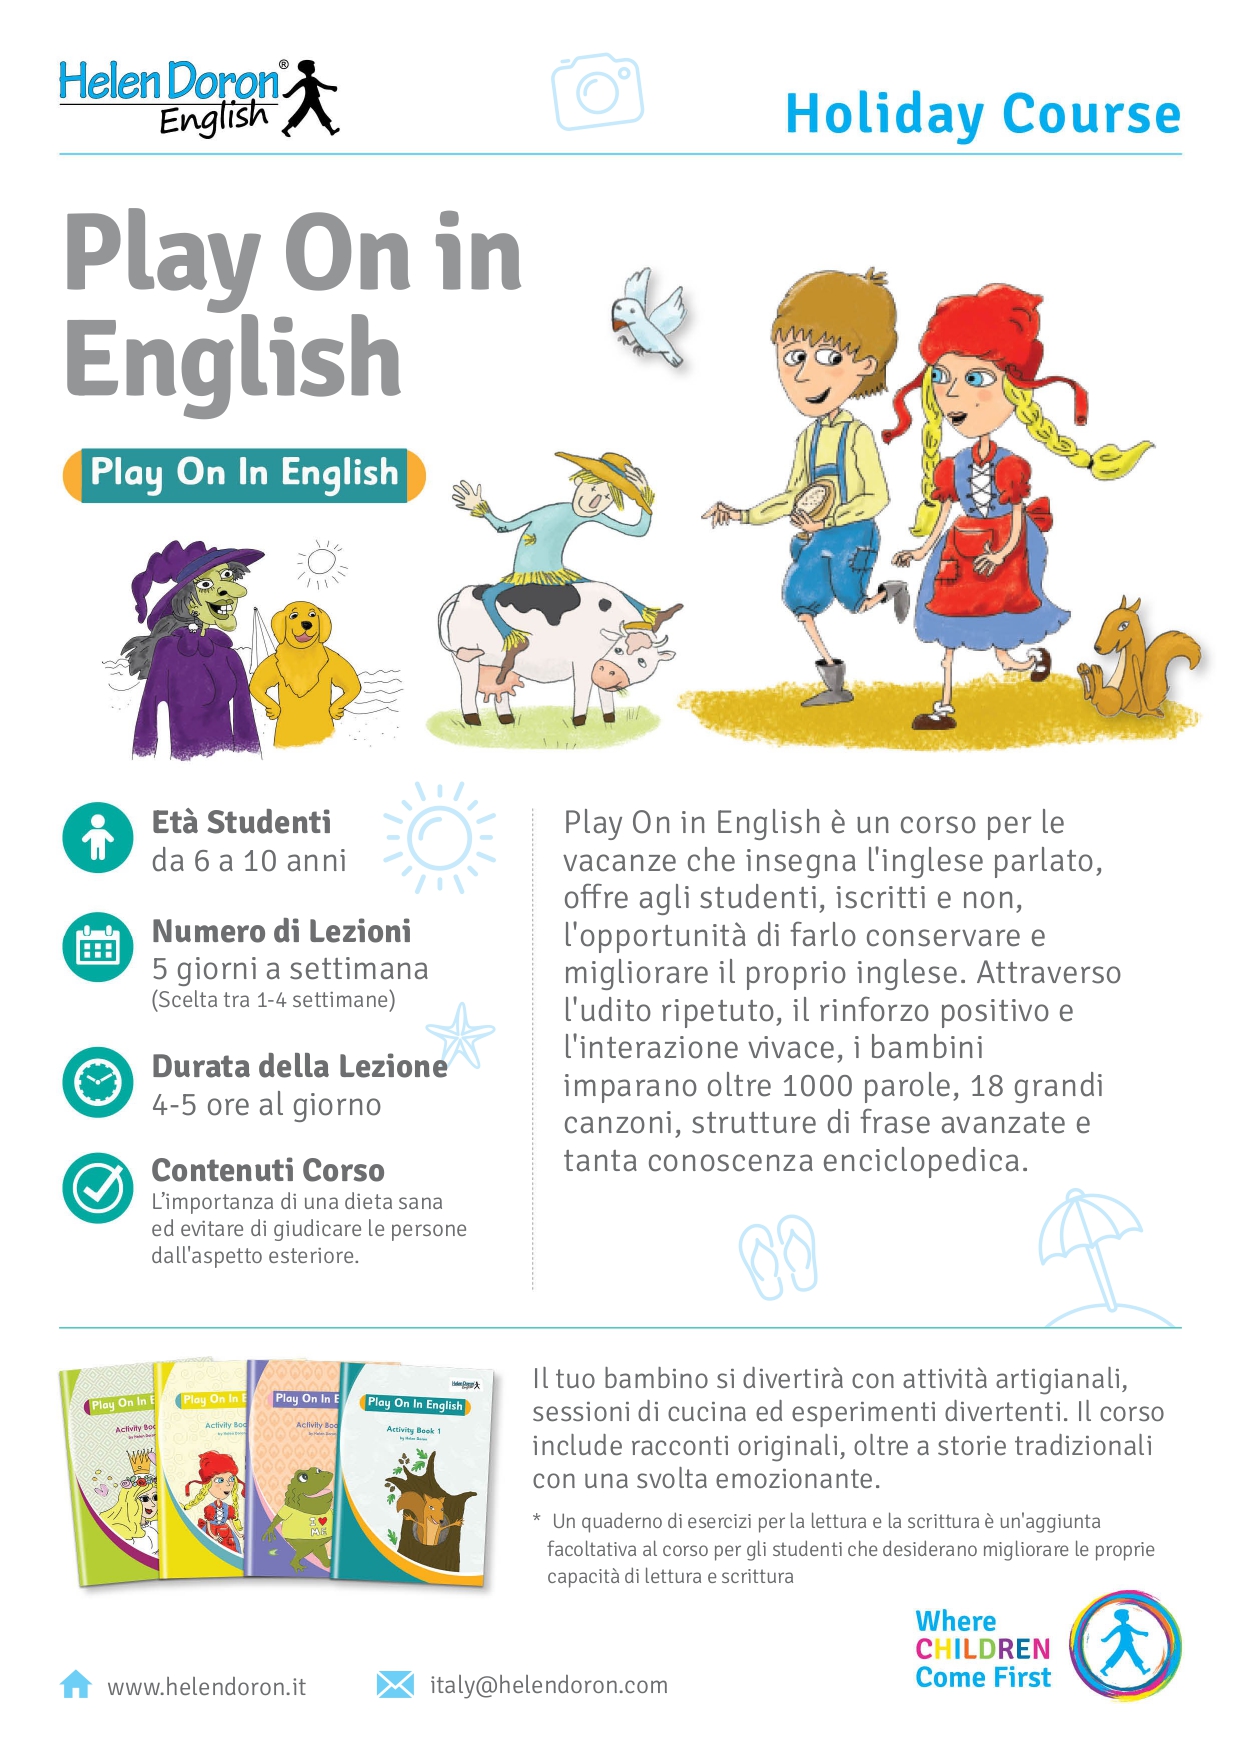 Download - Play On in English Holiday Course